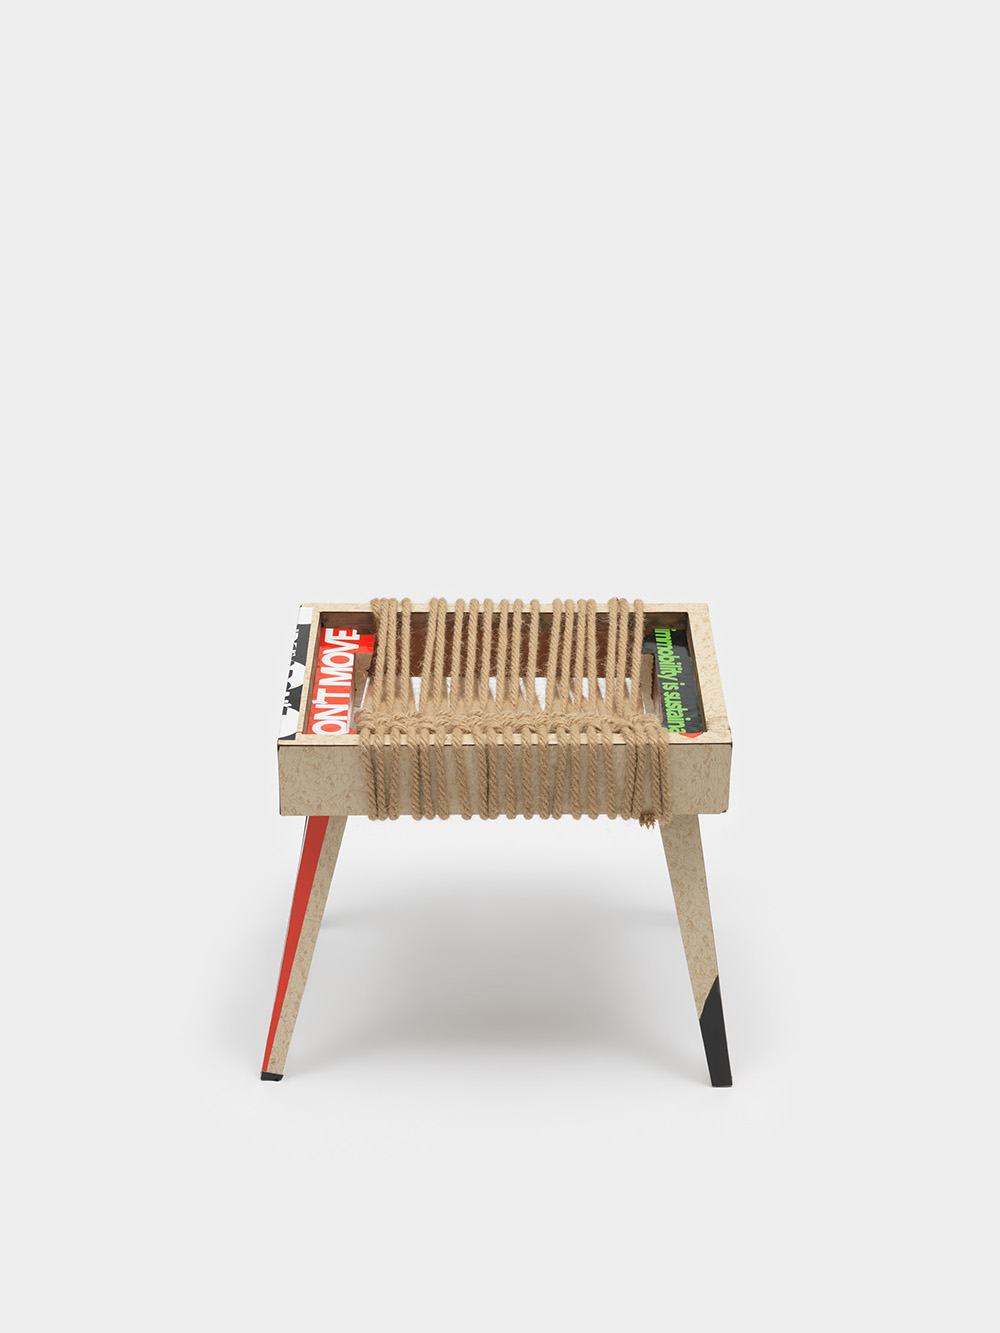 Product image: Foot Stool, modified by Evi, claim stickers, 2022 Athens, 4.6 tons